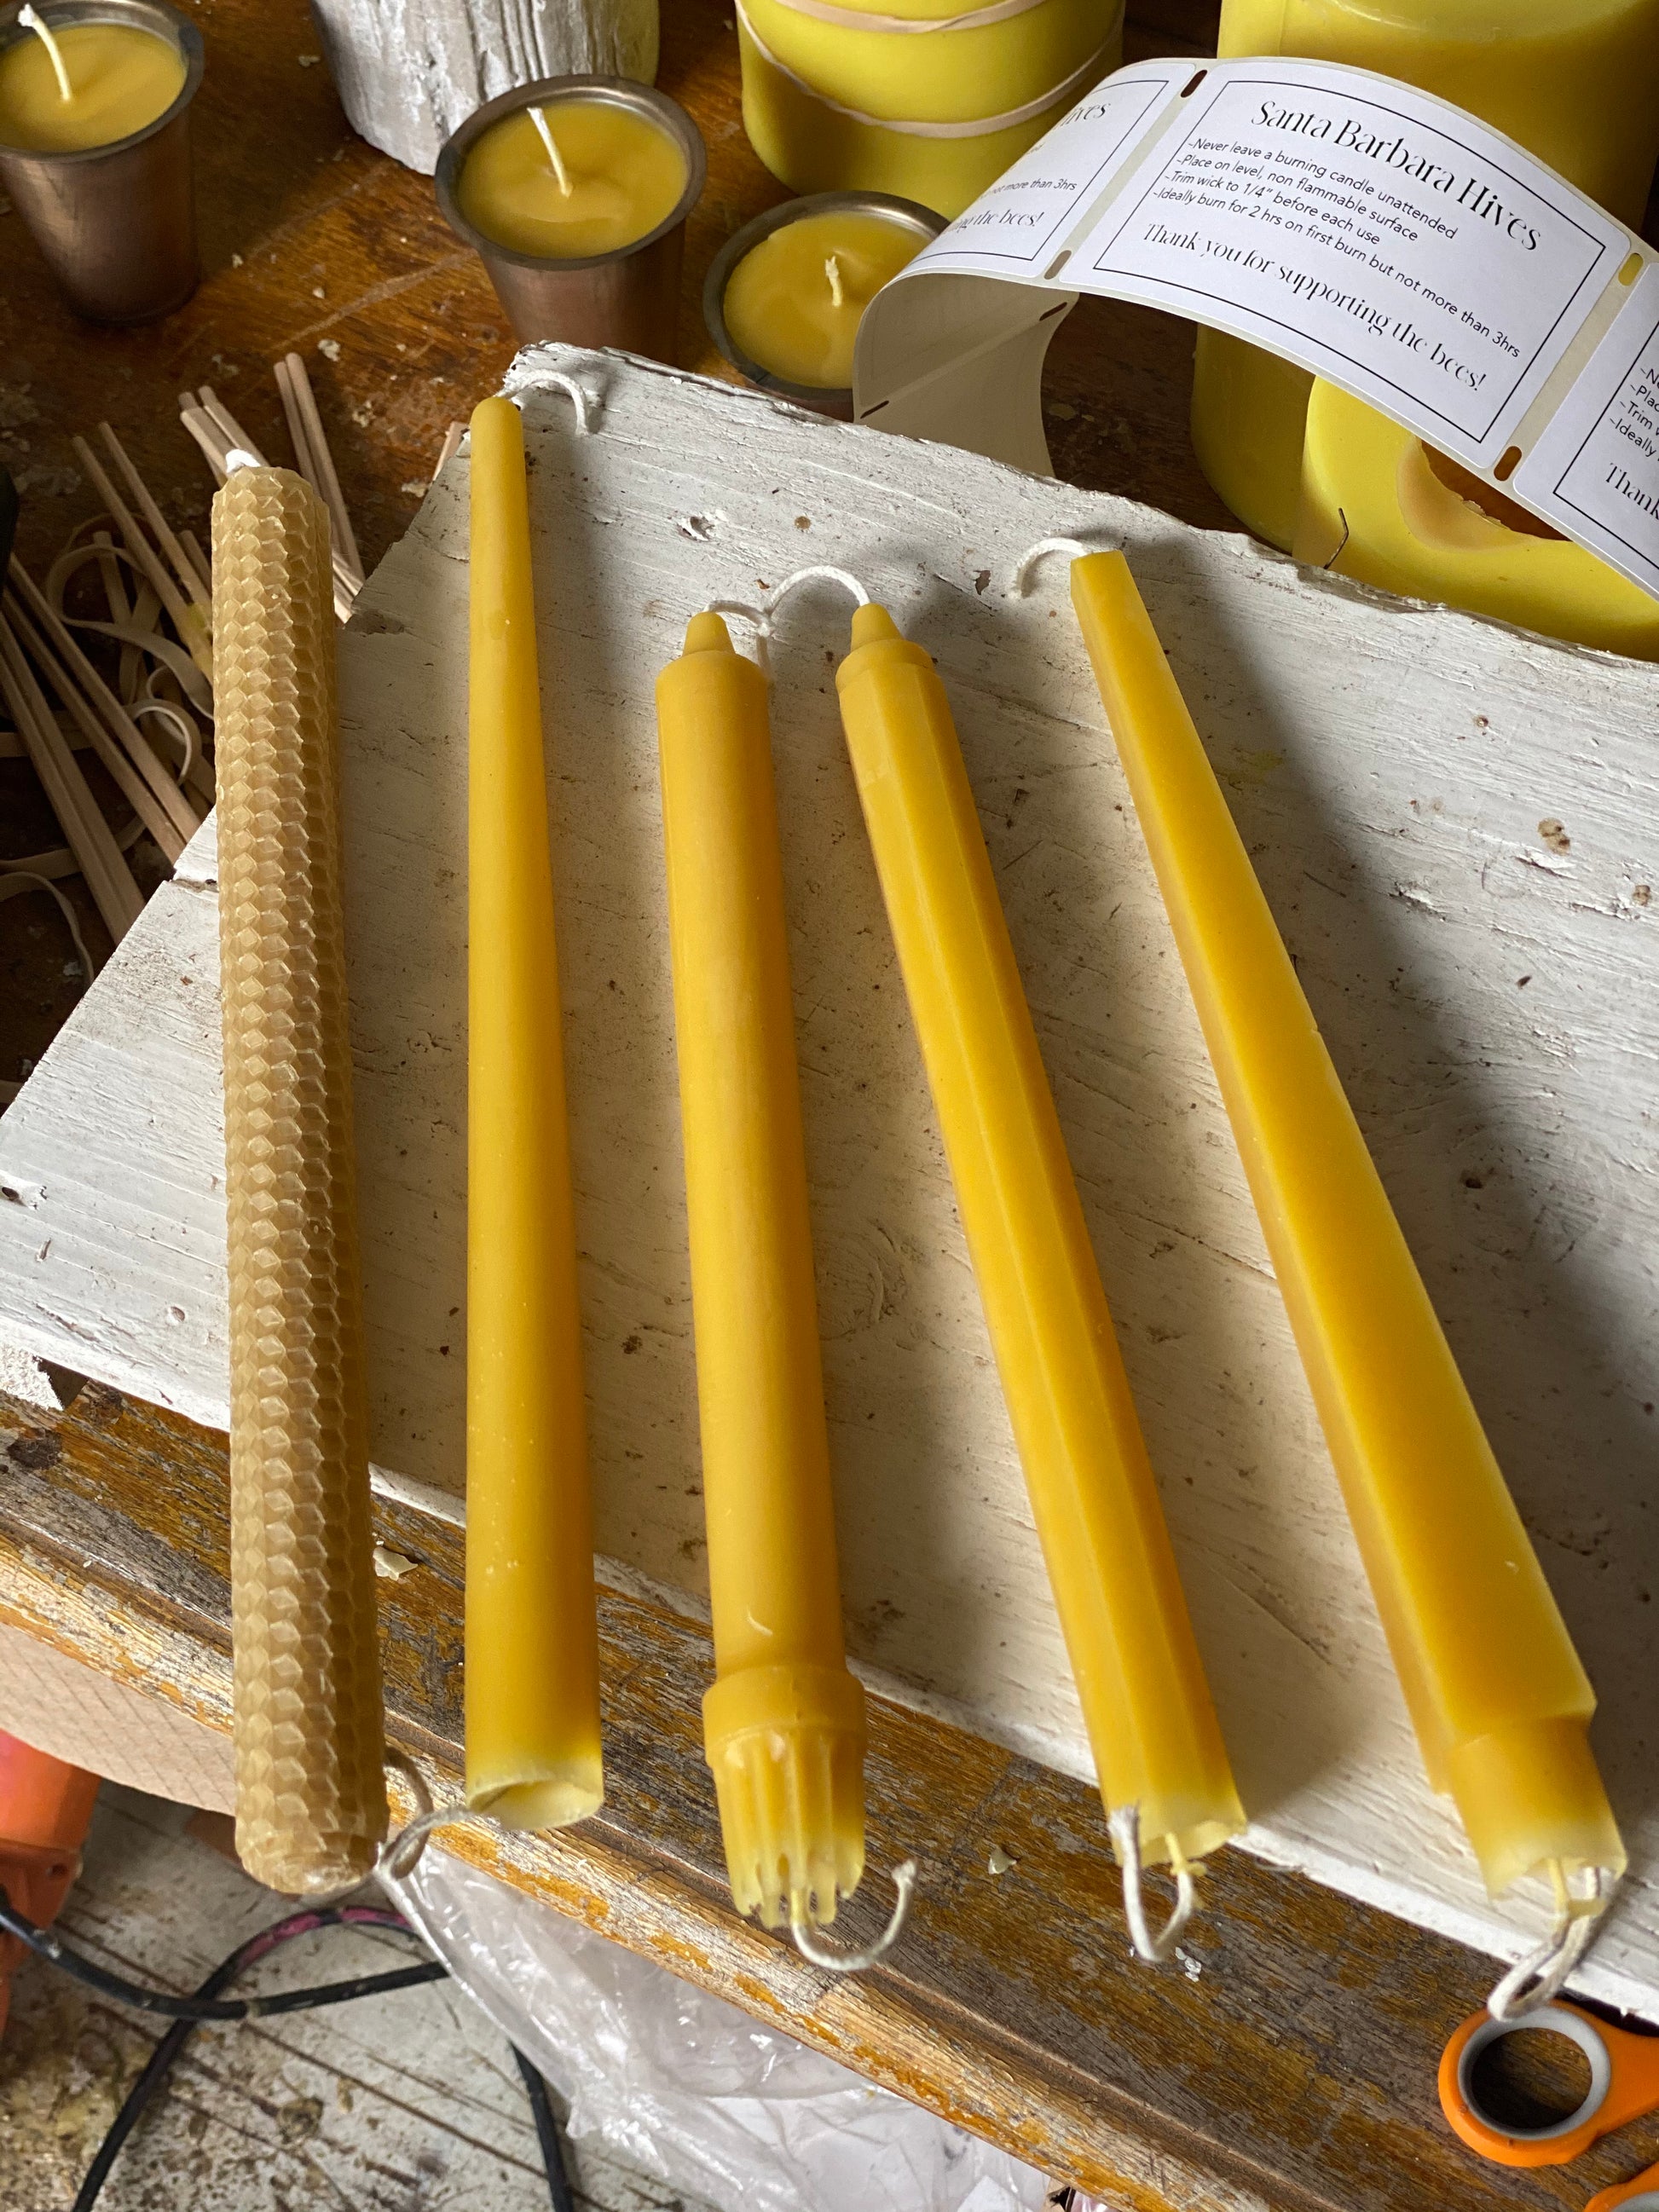 Sweet Comb Chicago 10 Tapered Beeswax Candles 